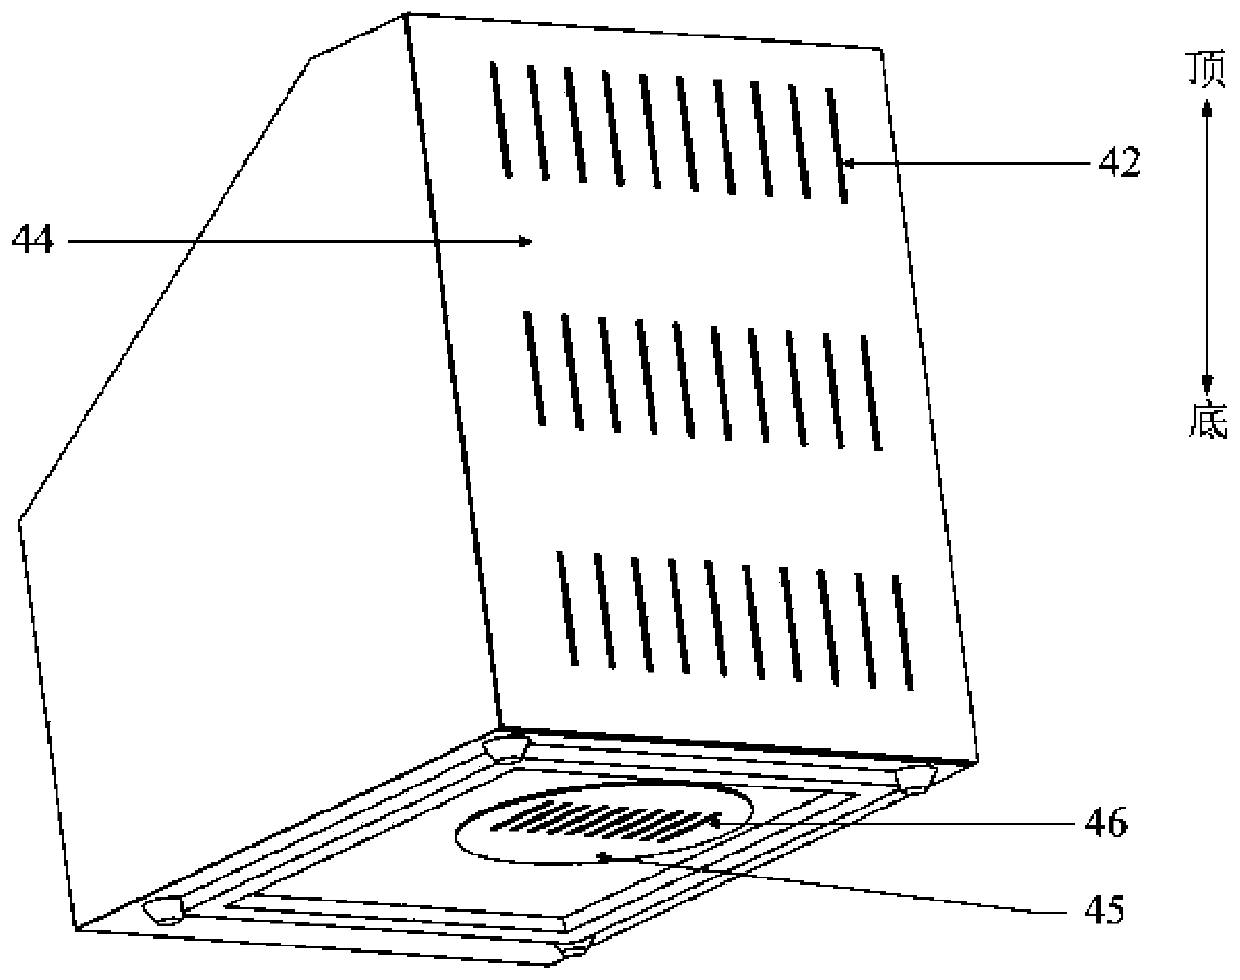 Microwave cavity components and microwave ovens